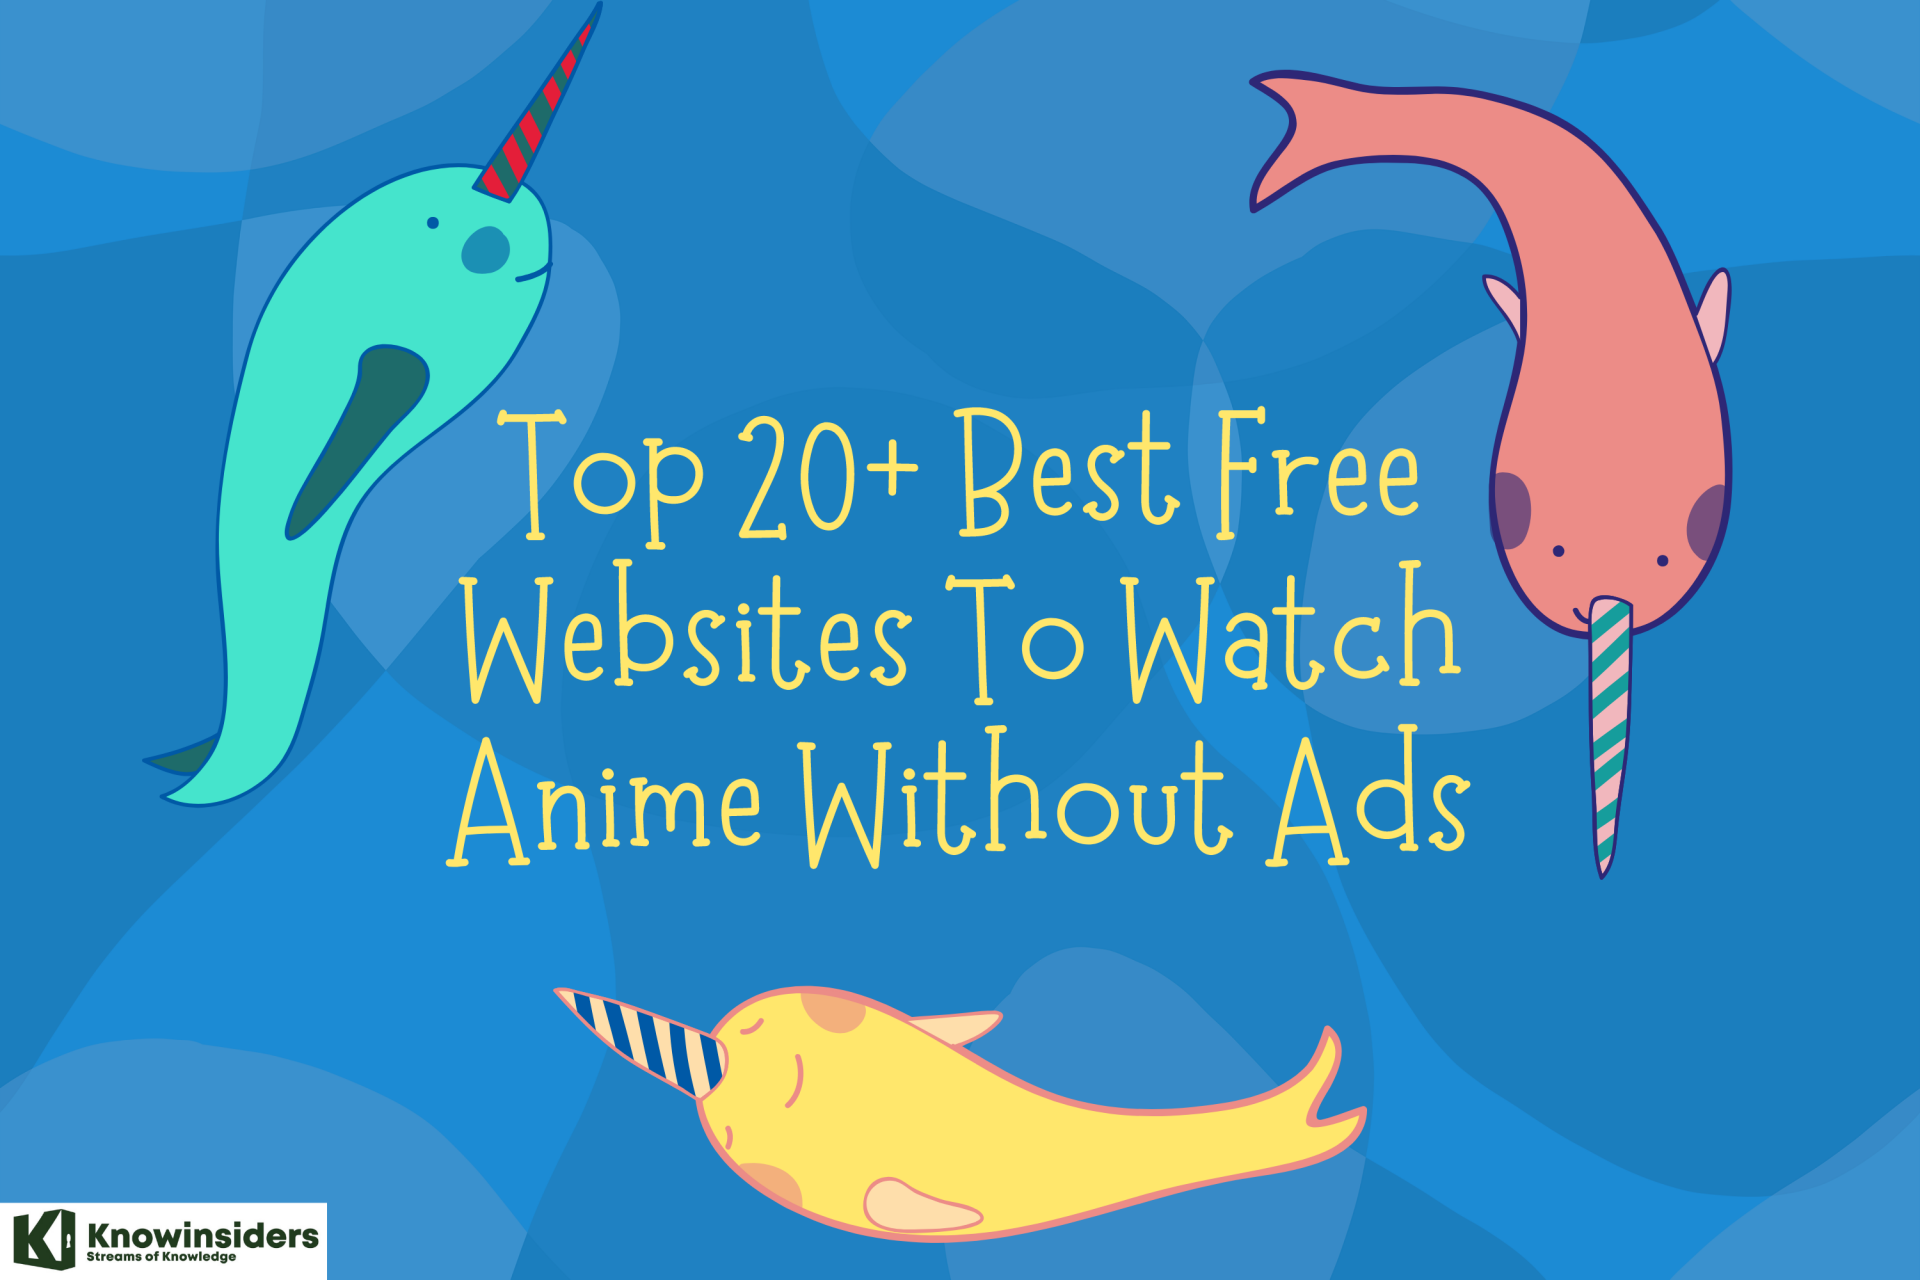 Top 20+ Best Free Websites To Watch Anime Without Ads